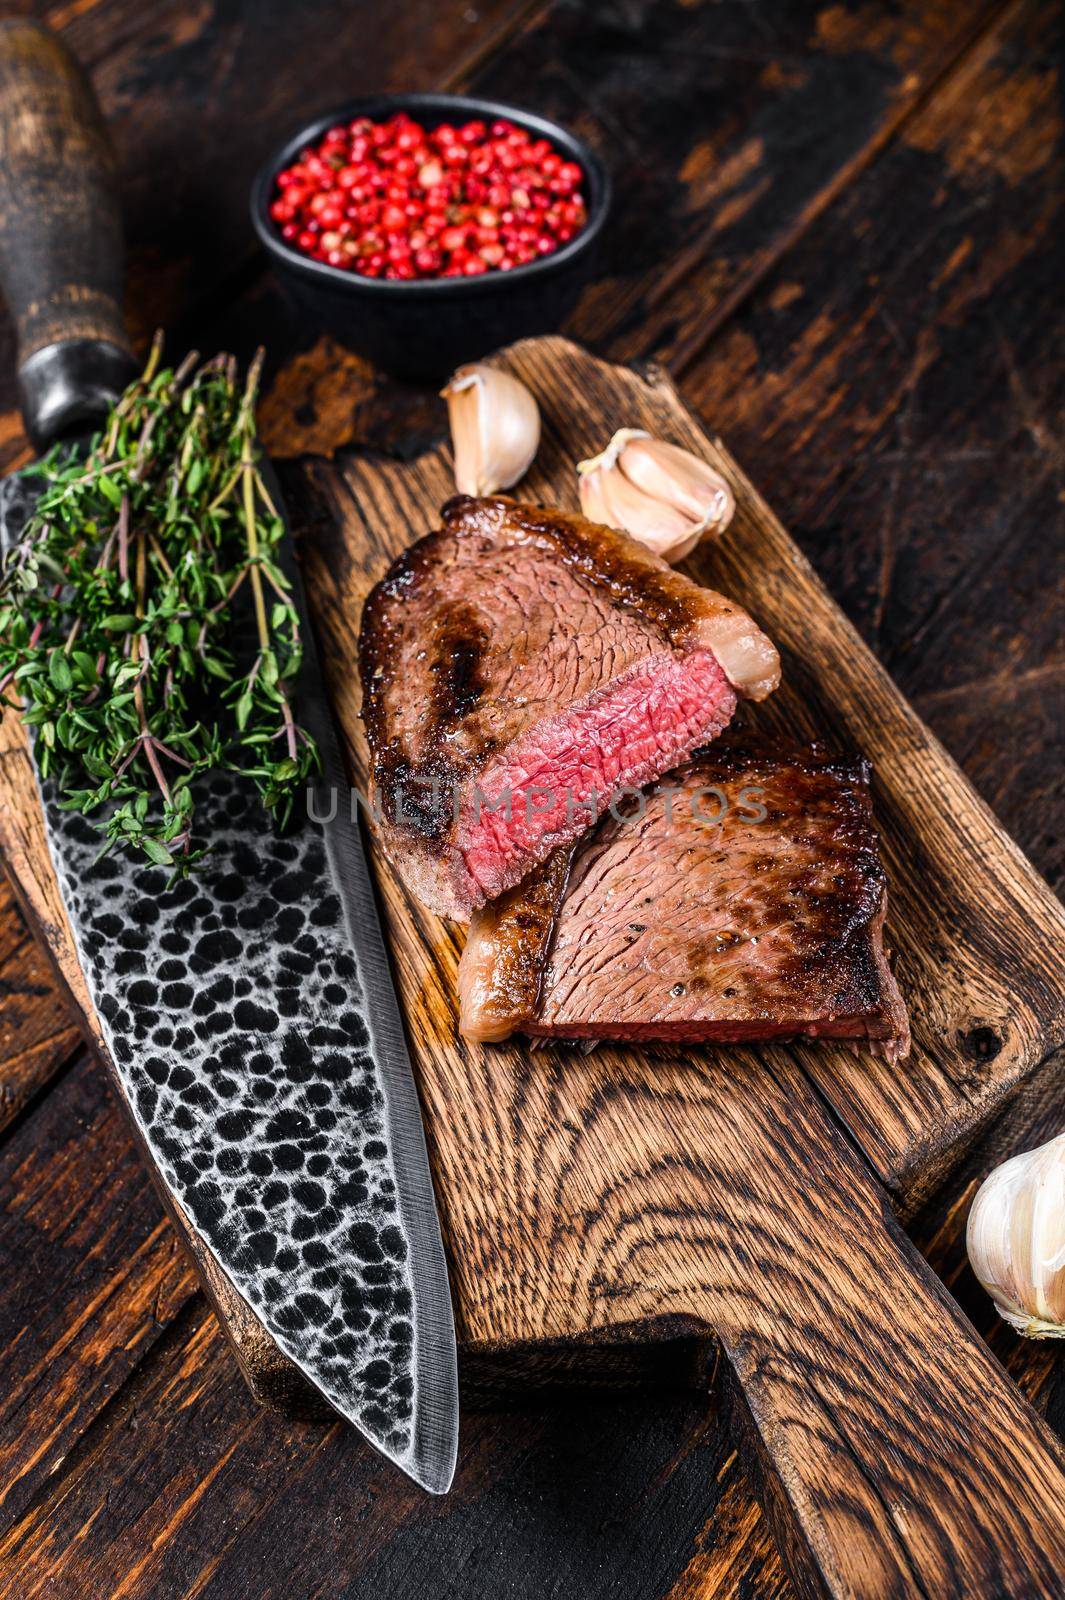 Cut fried rump cap or brazilian picanha beef meat steak on a wooden board. Dark wooden background. Top view.